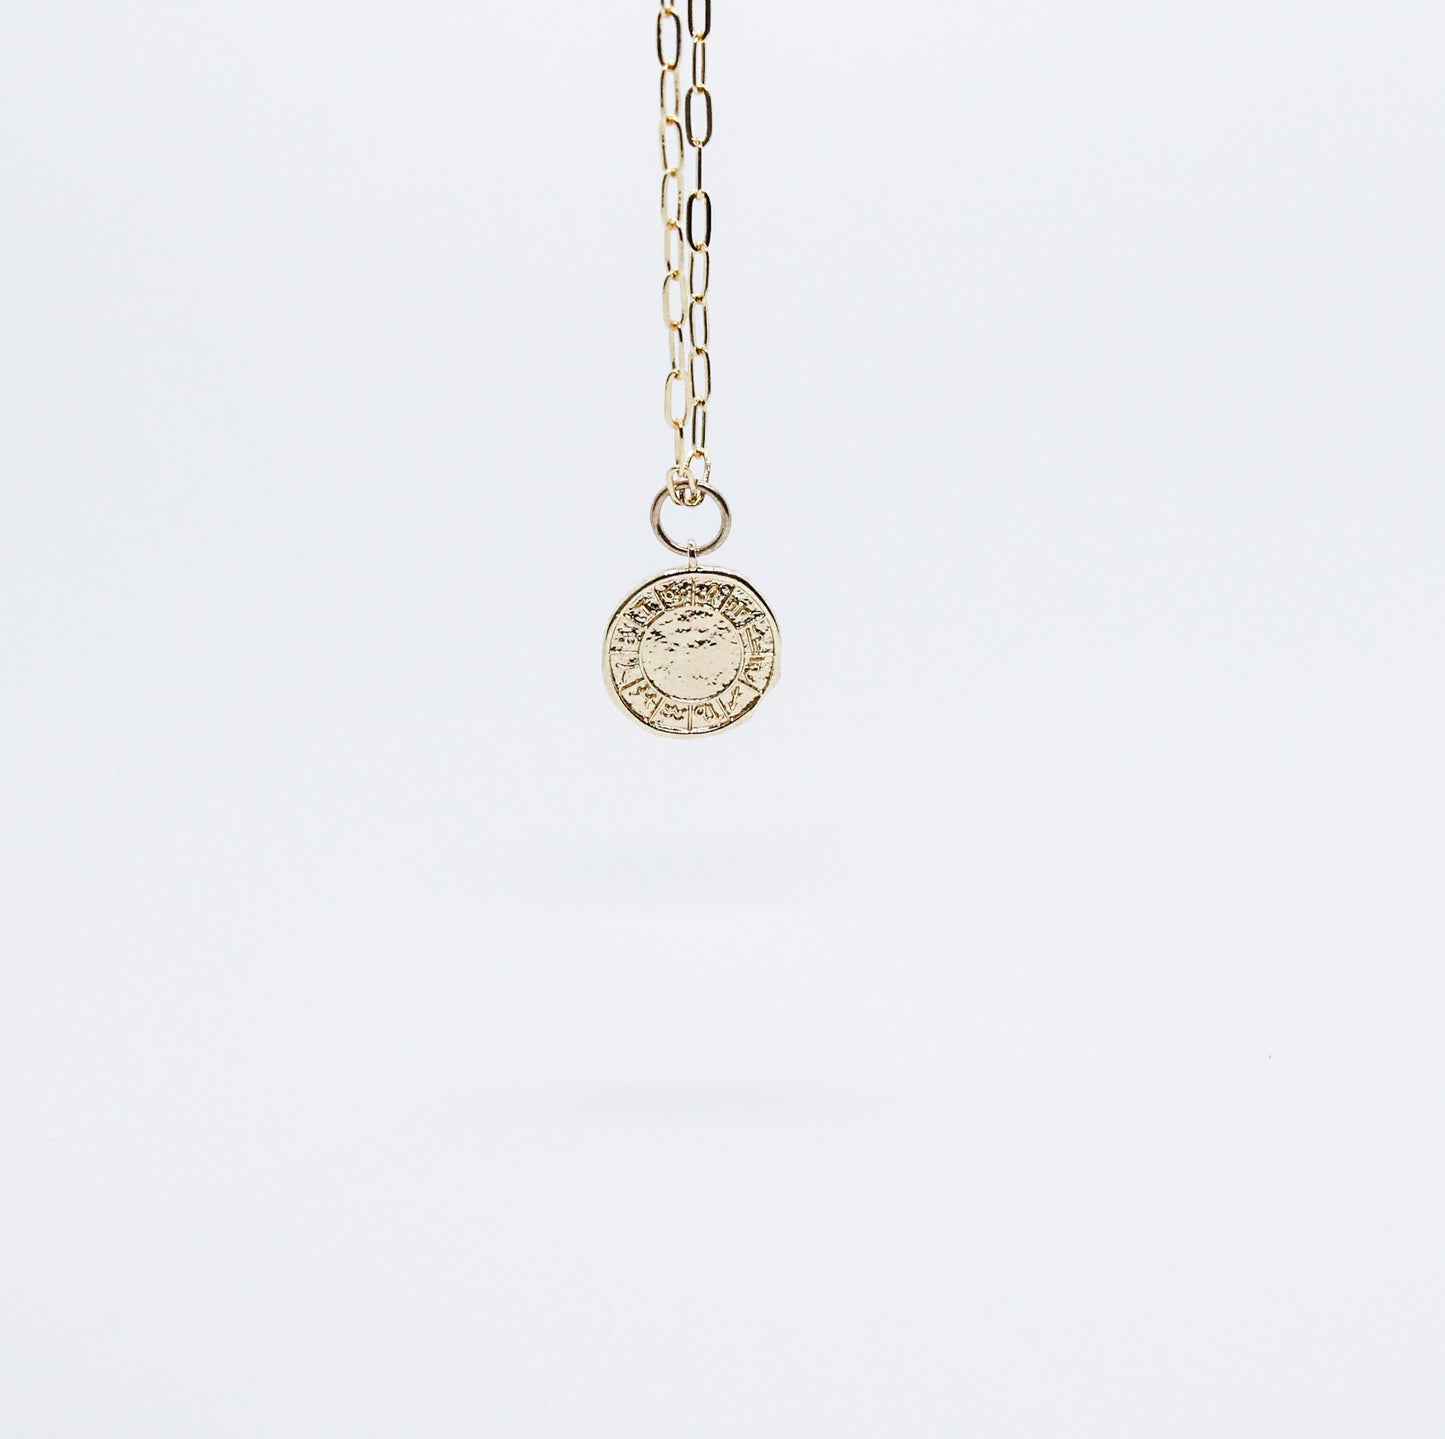 PaperClip Horoscope Medallion Necklace